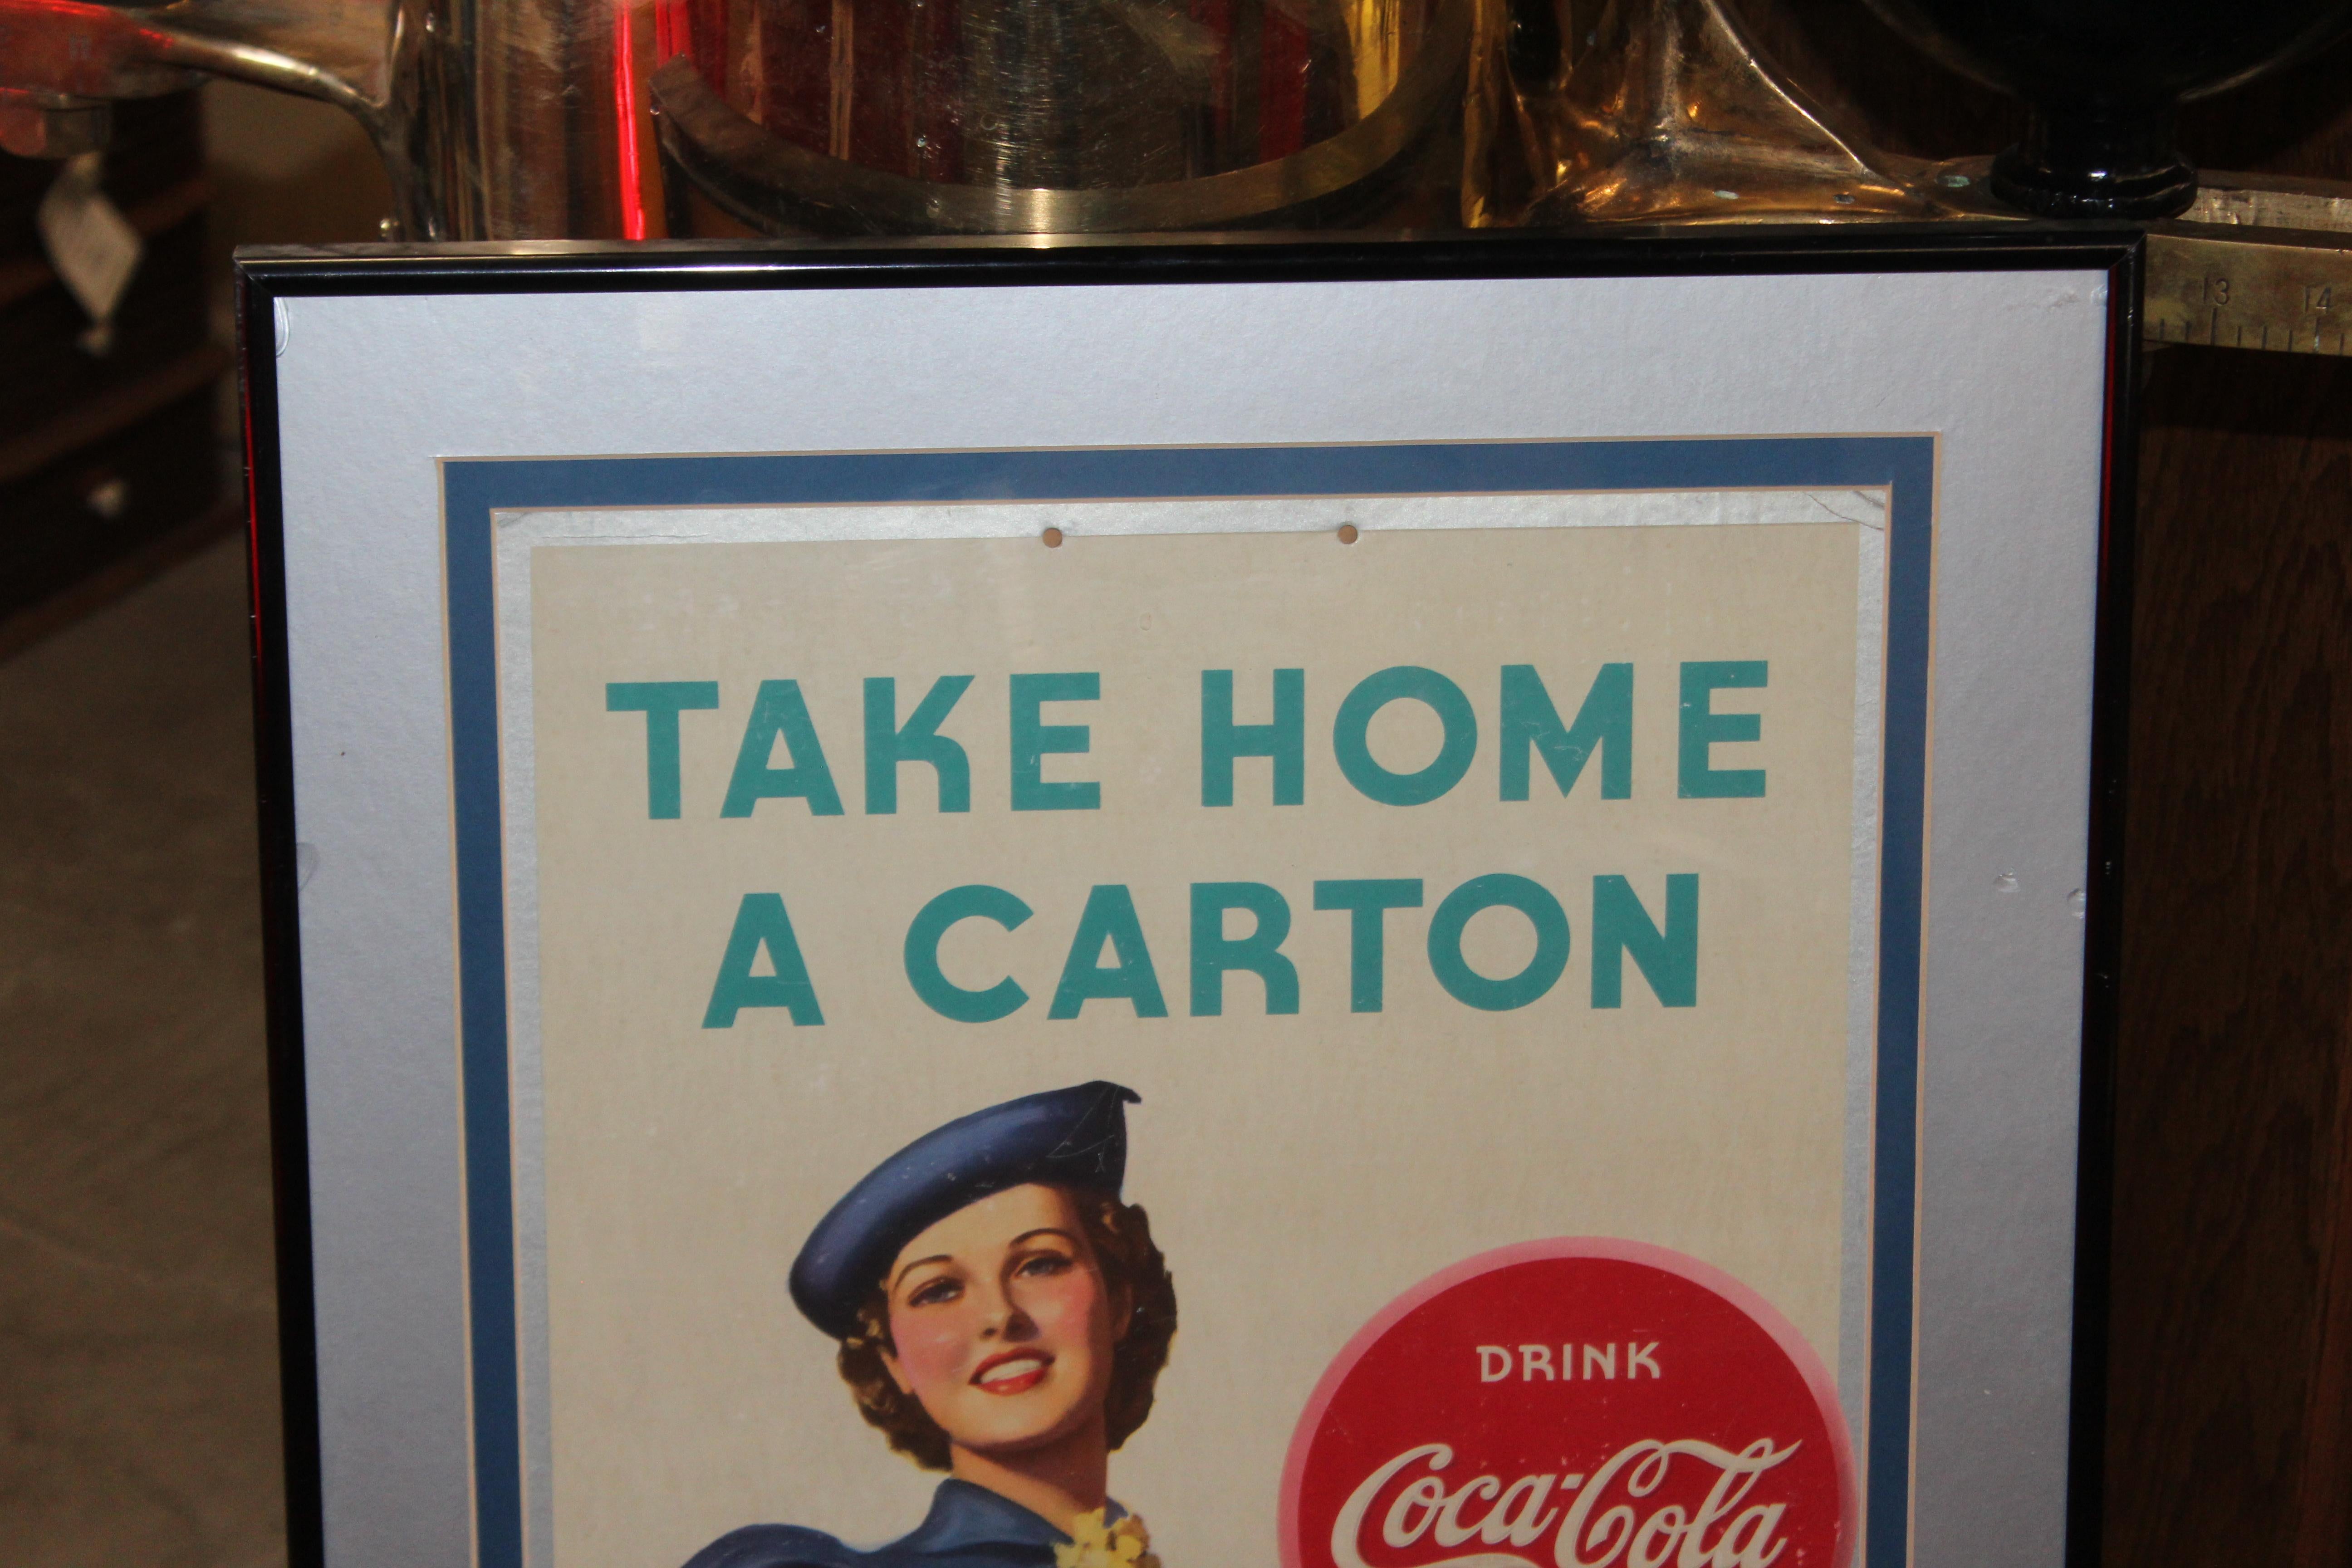 Great piece of Coca Cola advertising on cardboard. This advertising is by Snyder & Black Inc. NY Litho from 1937.